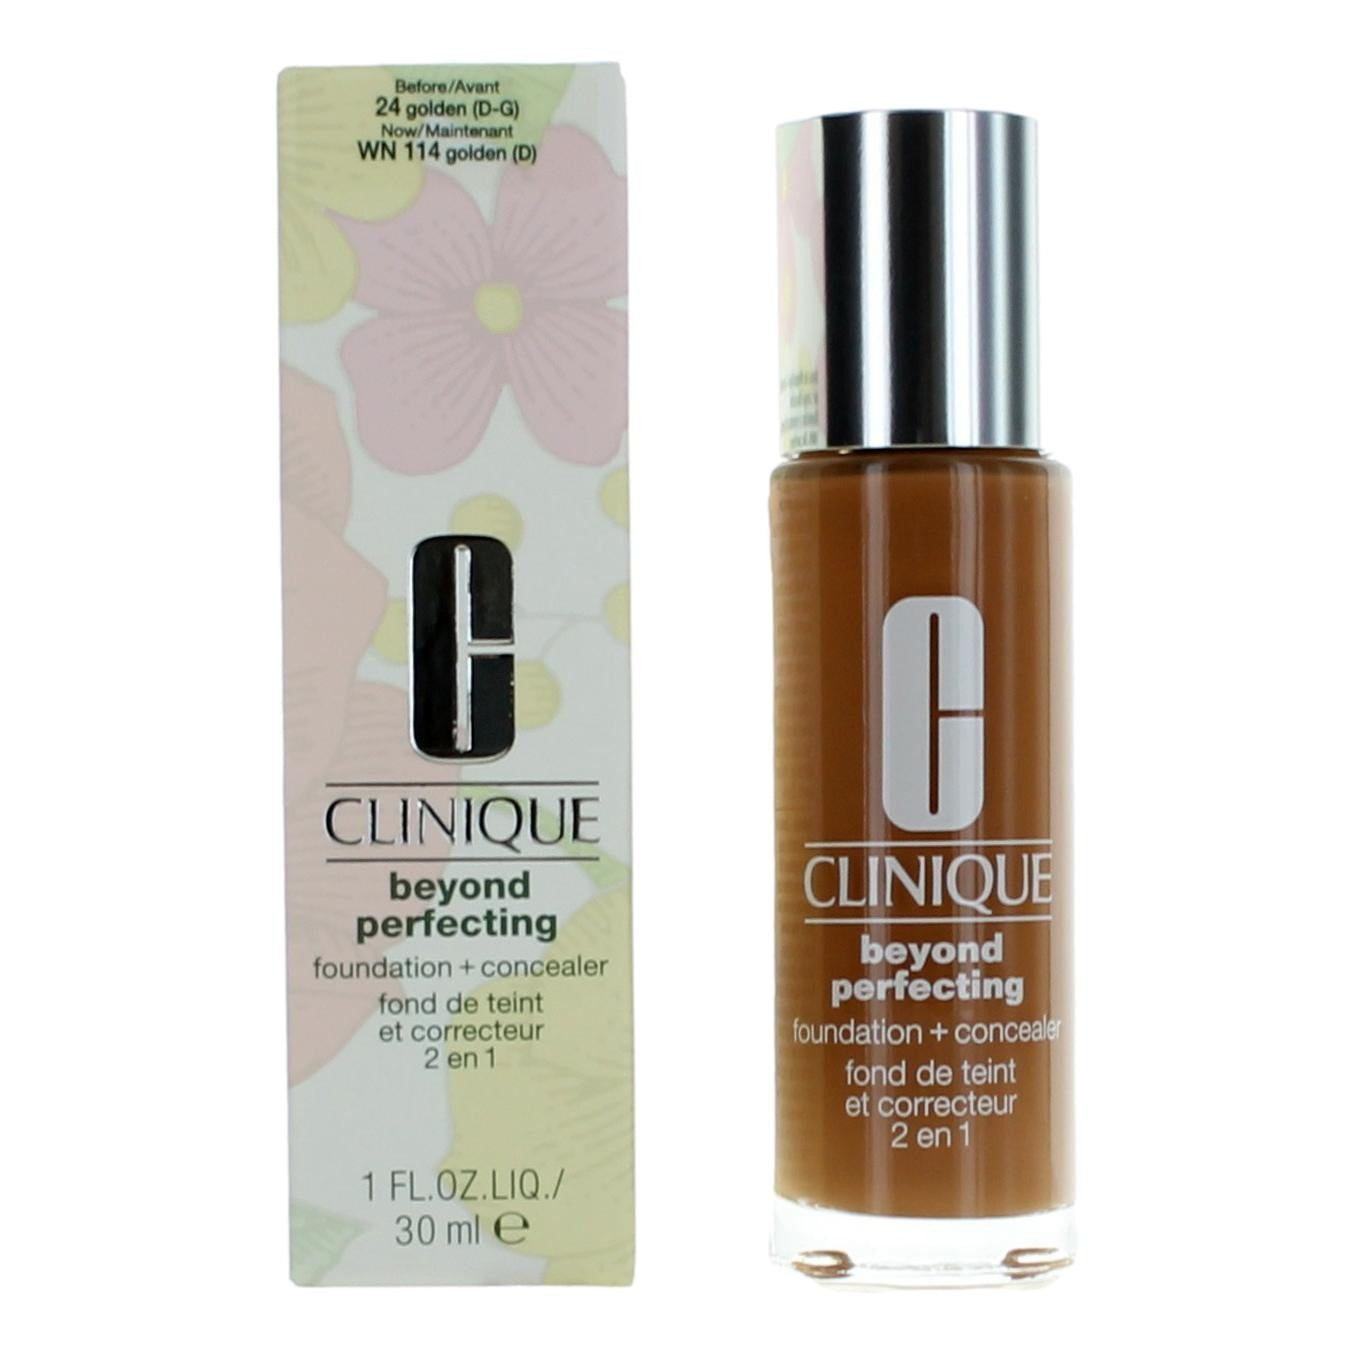 Clinique Beyond Perfecting, 1oz Foundation + Concealer - WN 114 Golden - WN 114 Golden